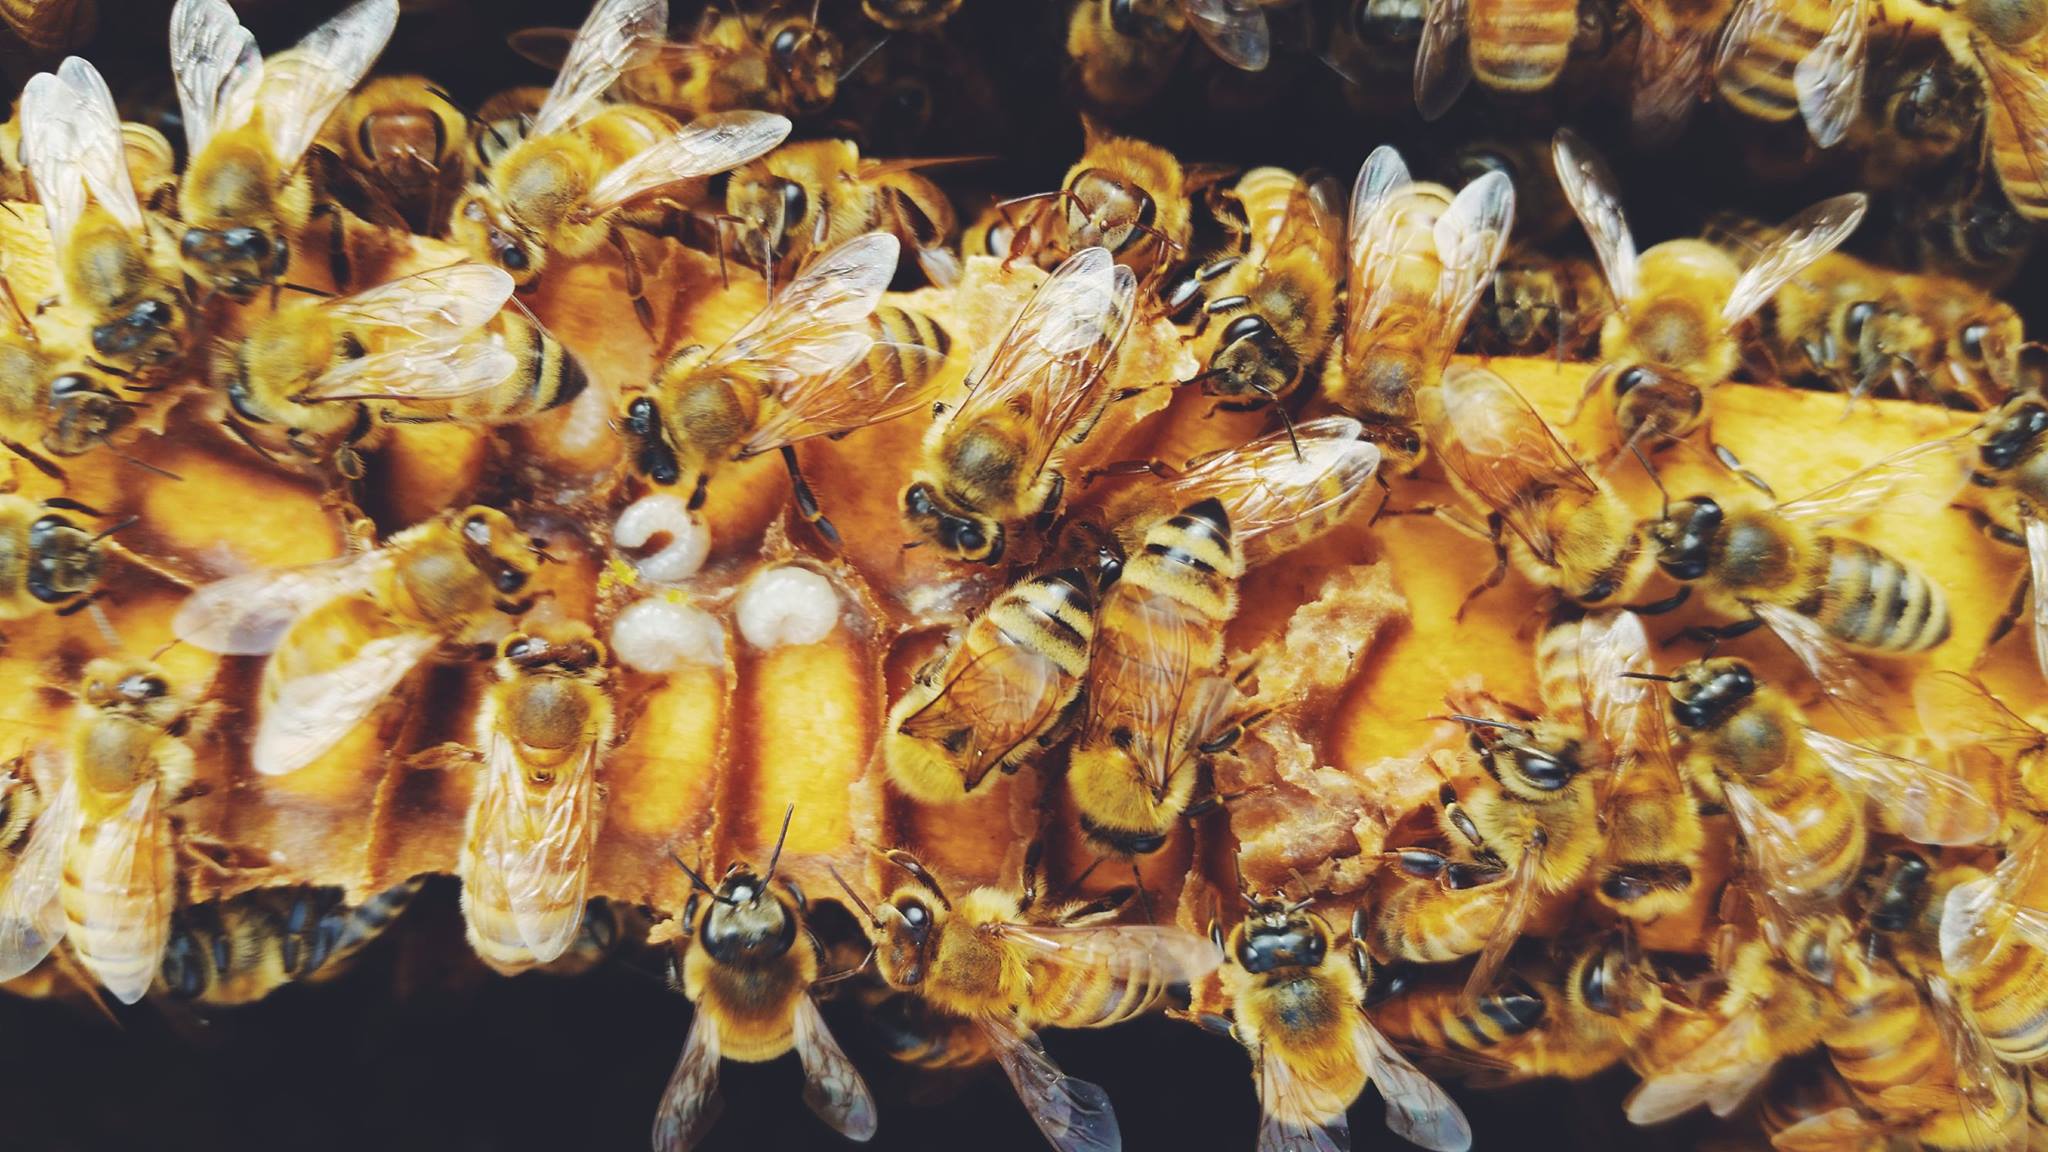 Group of working bees at one place